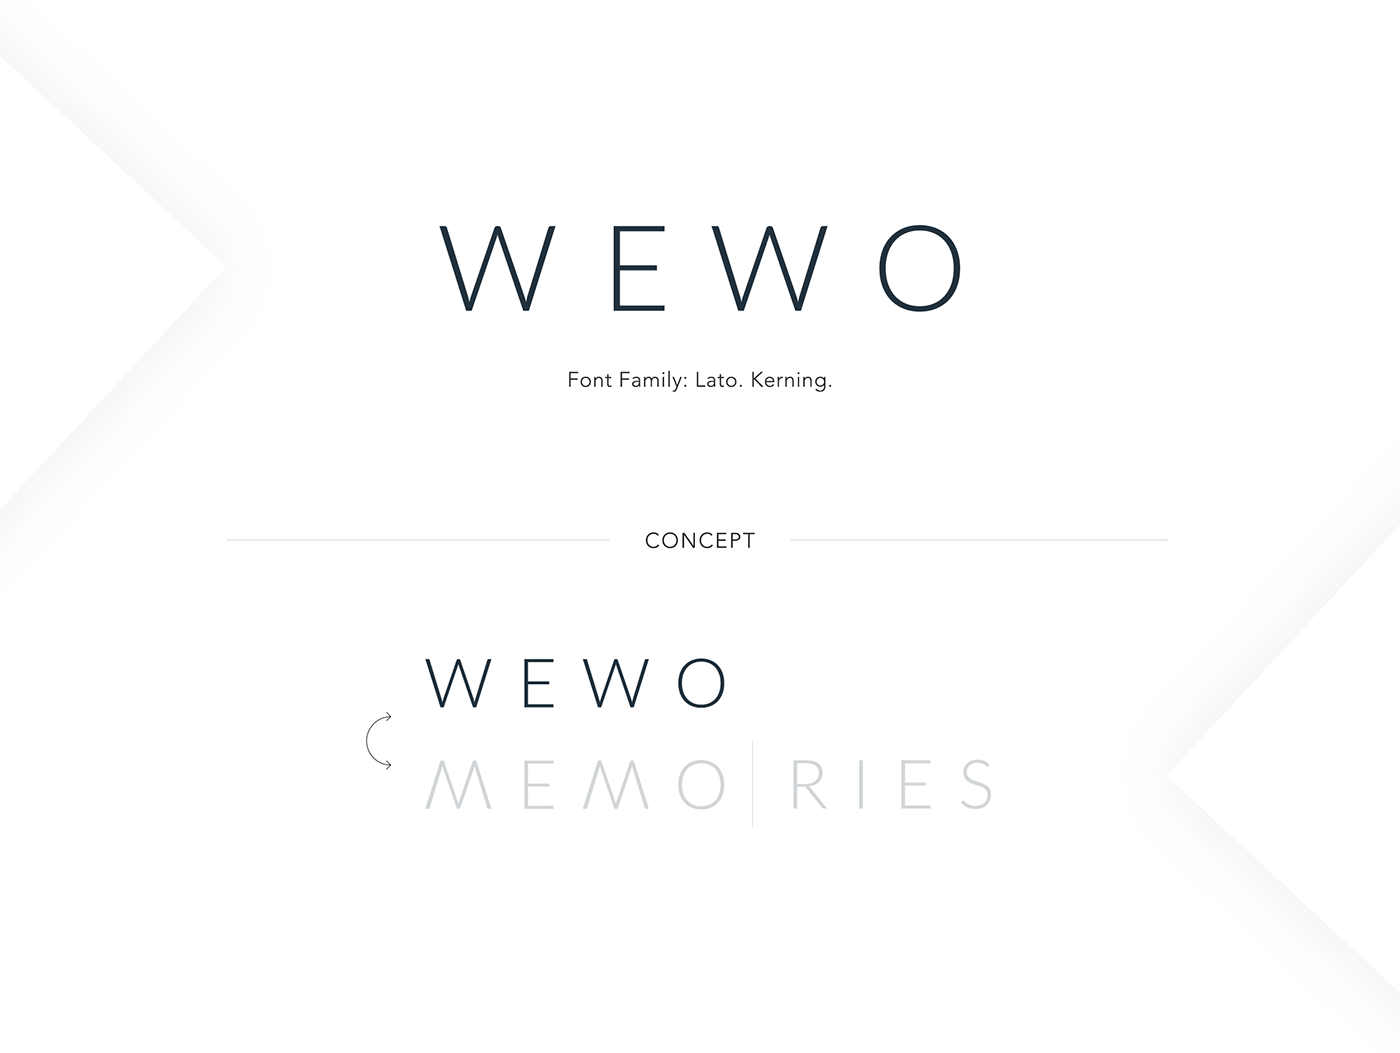 WEWO logo ui elements ux The Glyph Web Design  topography set of icons Mobile app interaction